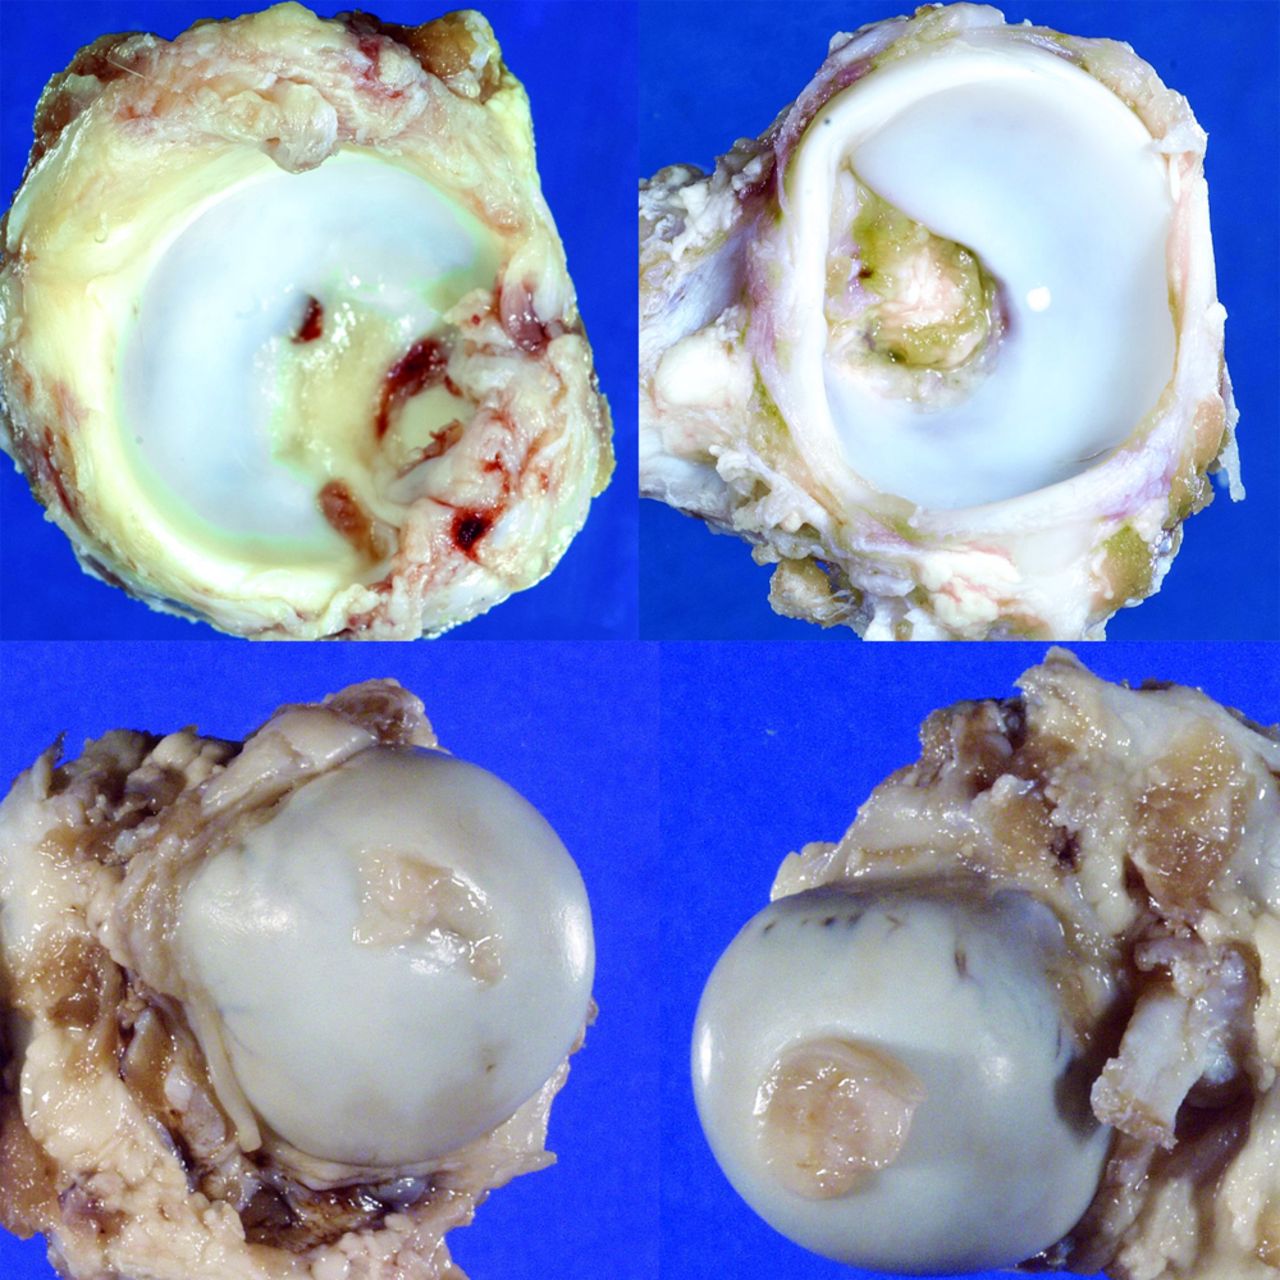 Fig. 3 
          Top. Photographs show deformed acetabulum
from operated side with flattened outer rim, shallow socket and
flattened outer cartilage surface (left). Normal non-operated acetabulum
(right) shows differences from operated side. Below, femoral heads
are seen in superior views. Asymmetric shape of operated femoral
head (left) is seen.
        